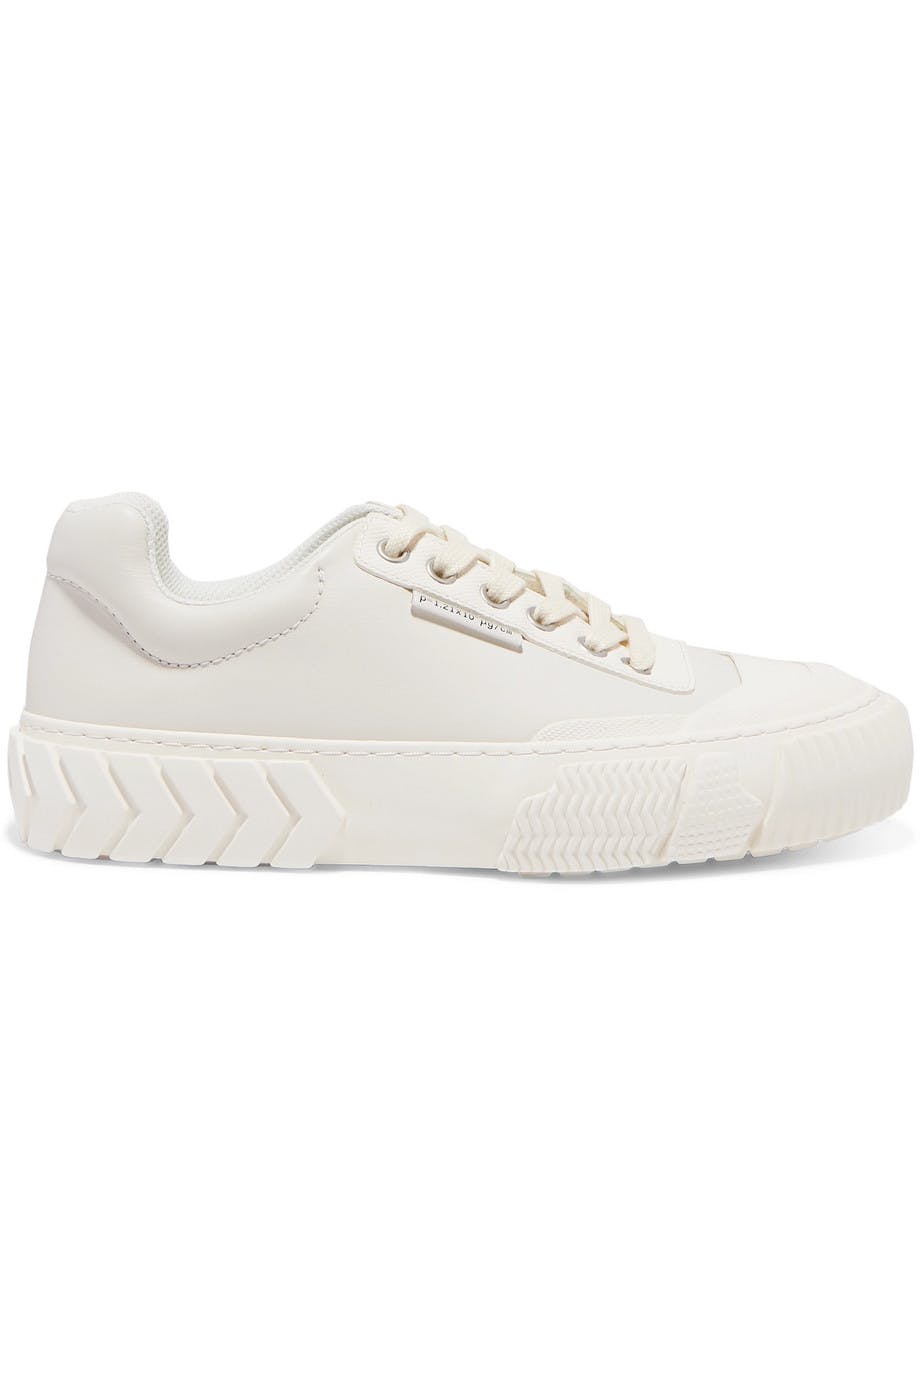 Best women's white trainers and sneakers to shop now